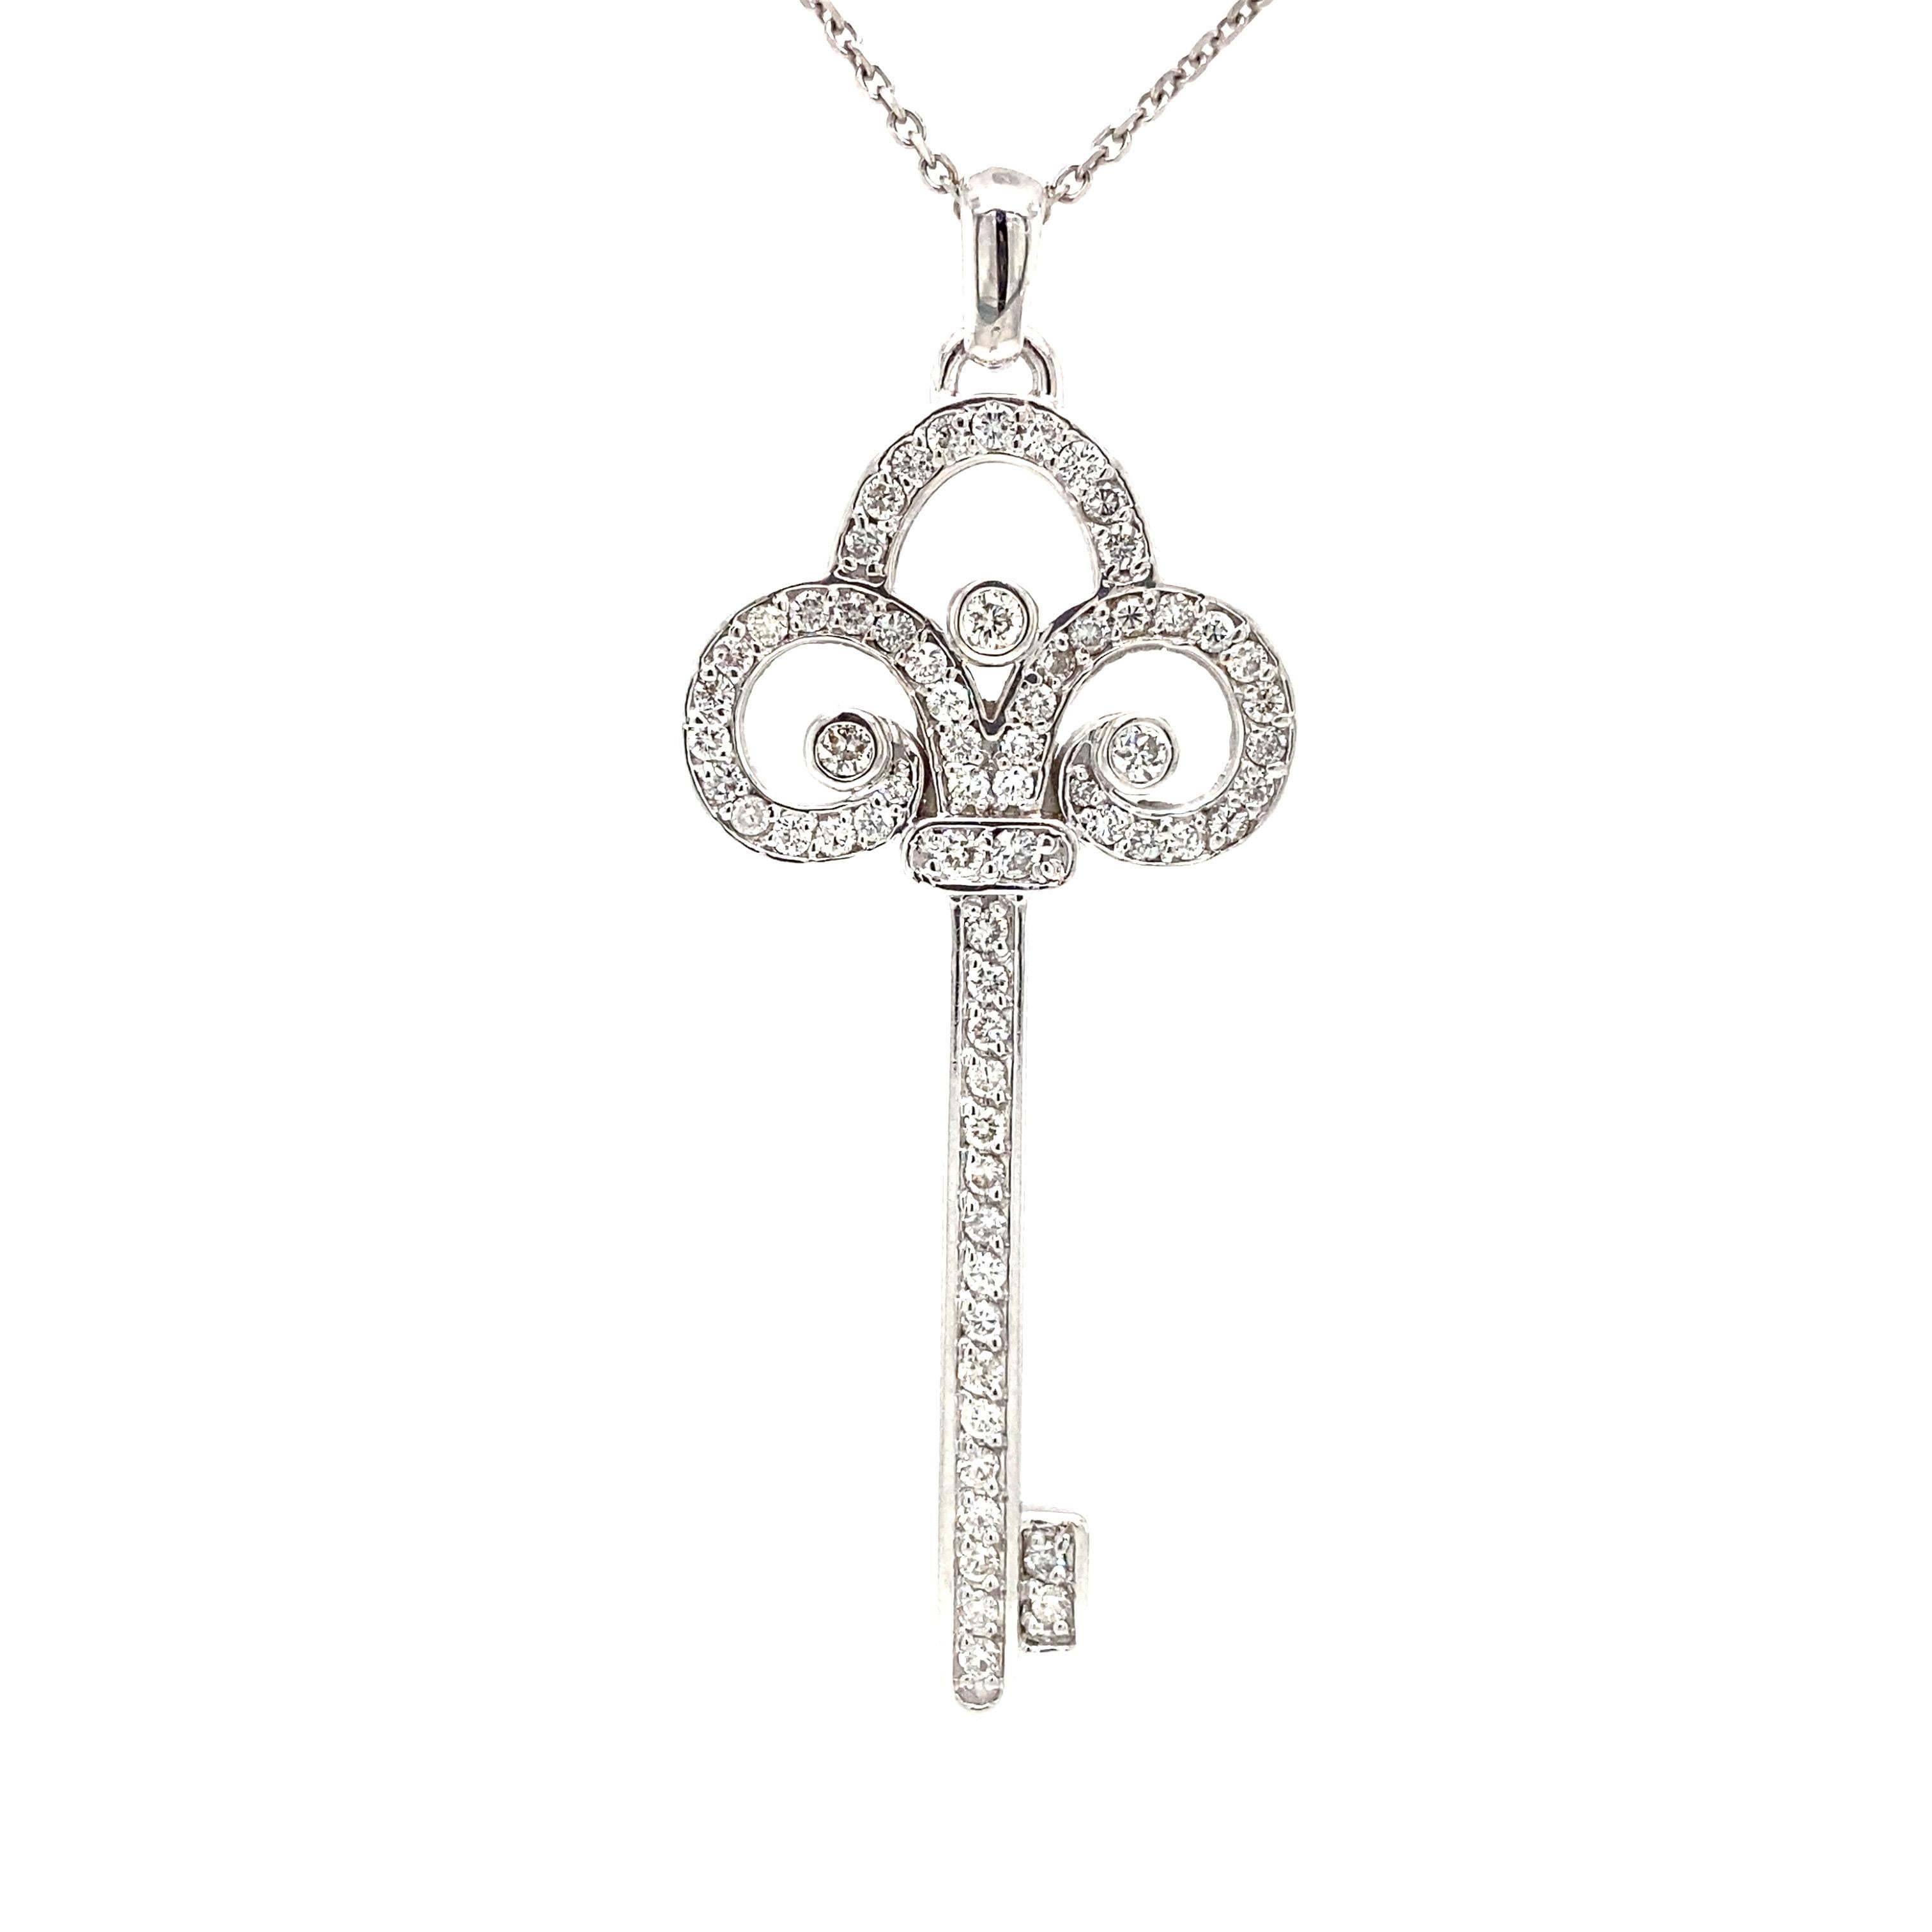 Diamond Key Pendant in 18K White Gold.  (64) Round Brilliant Cut Diamonds weighing 1.50 carat total weight, G-H in color and VS-SI in clarity are expertly set.  The Key measures 2 1/4 inch in length and 1 inch in width.  6.84 grams.  Chain not